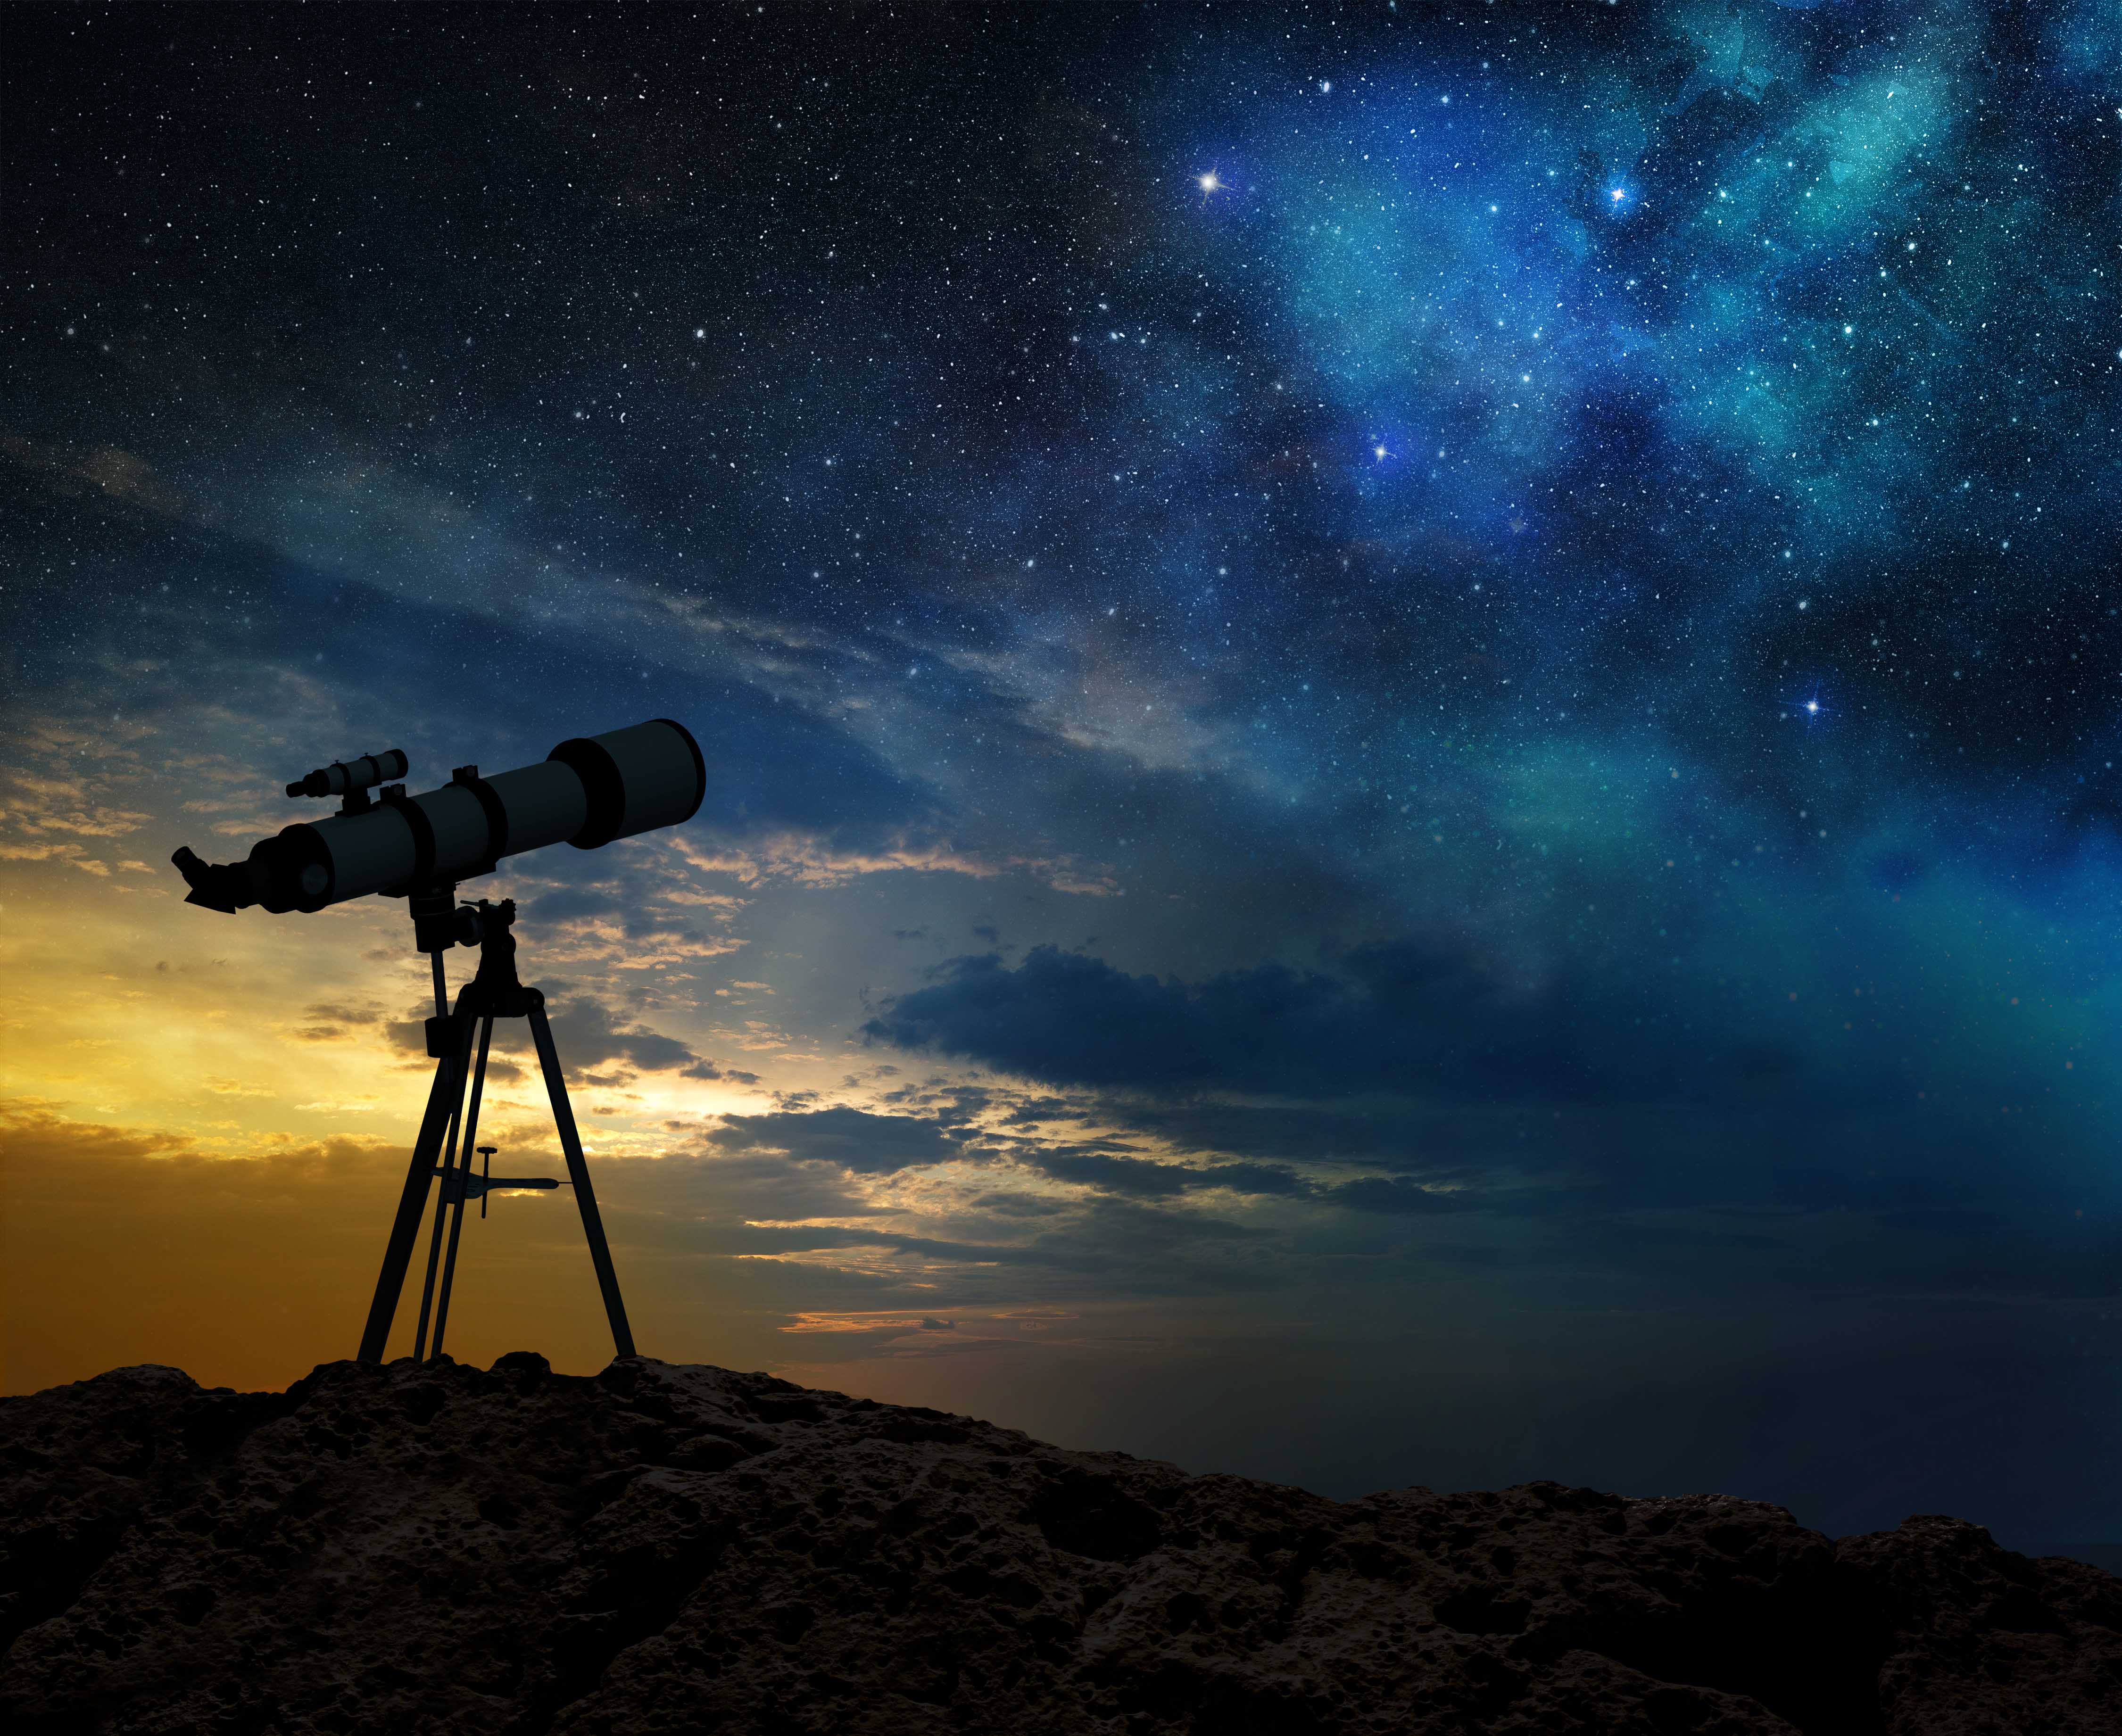 view of a telescope with stars in the sky